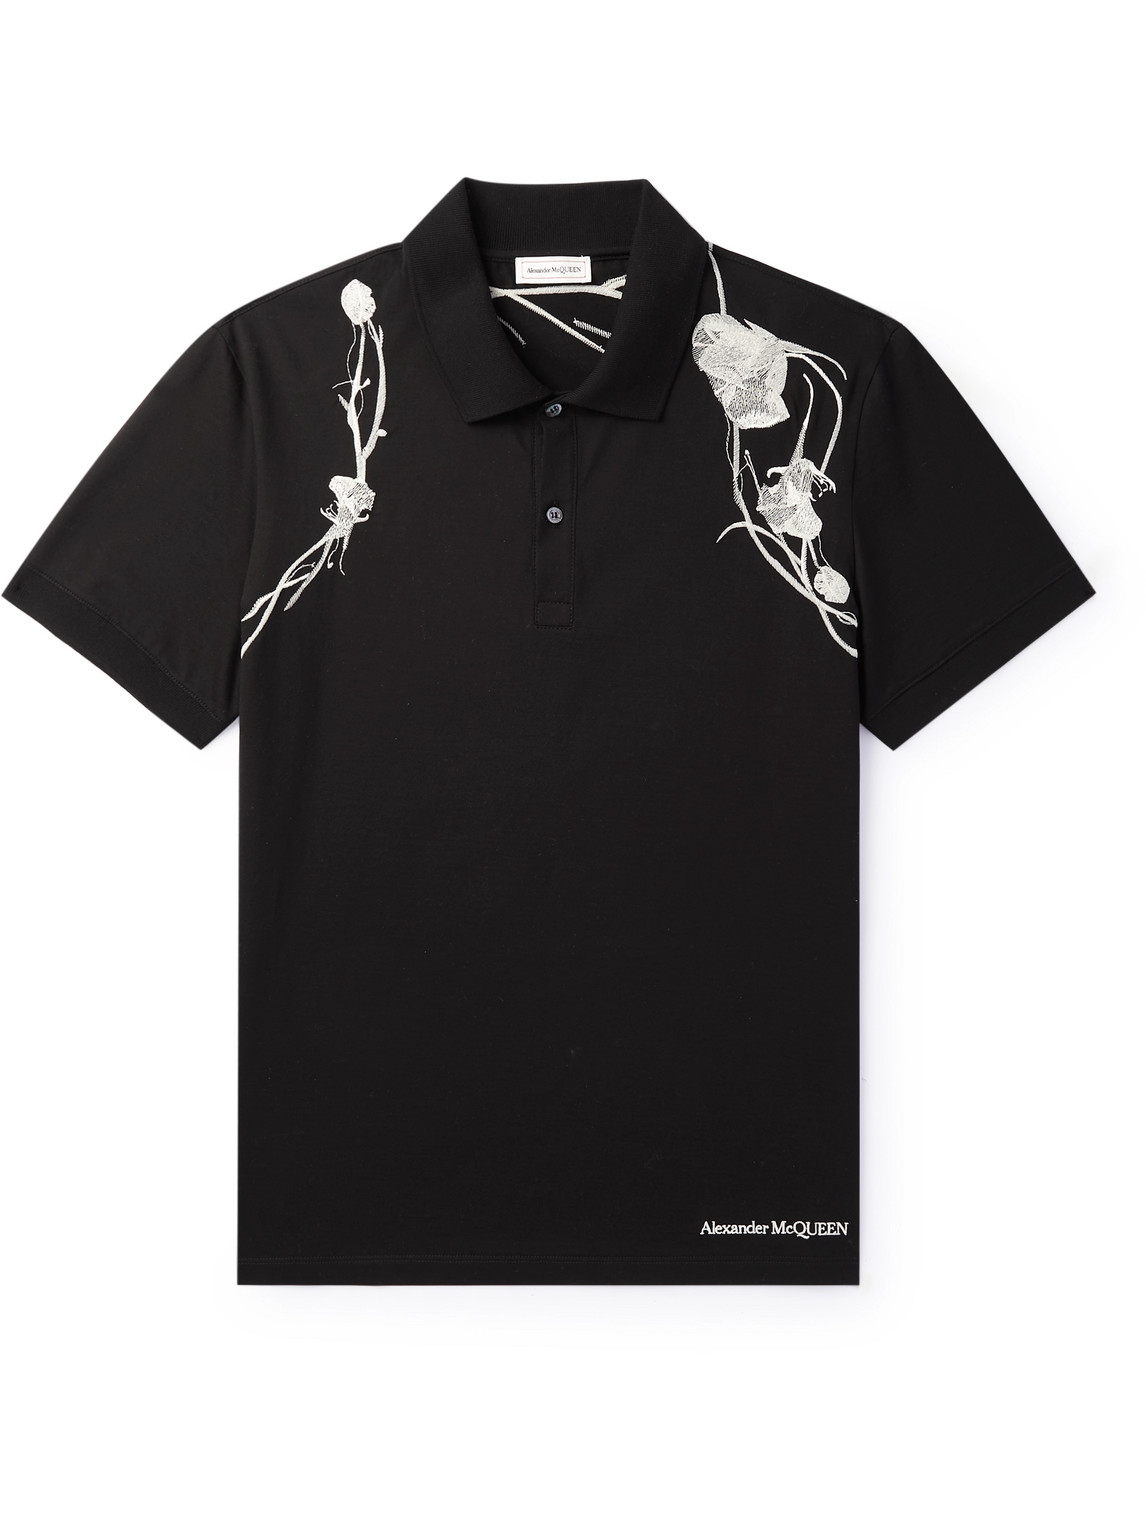 Alexander Mcqueen Pressed Flower Harness Embroidered Cotton-jersey Polo Shirt In Black